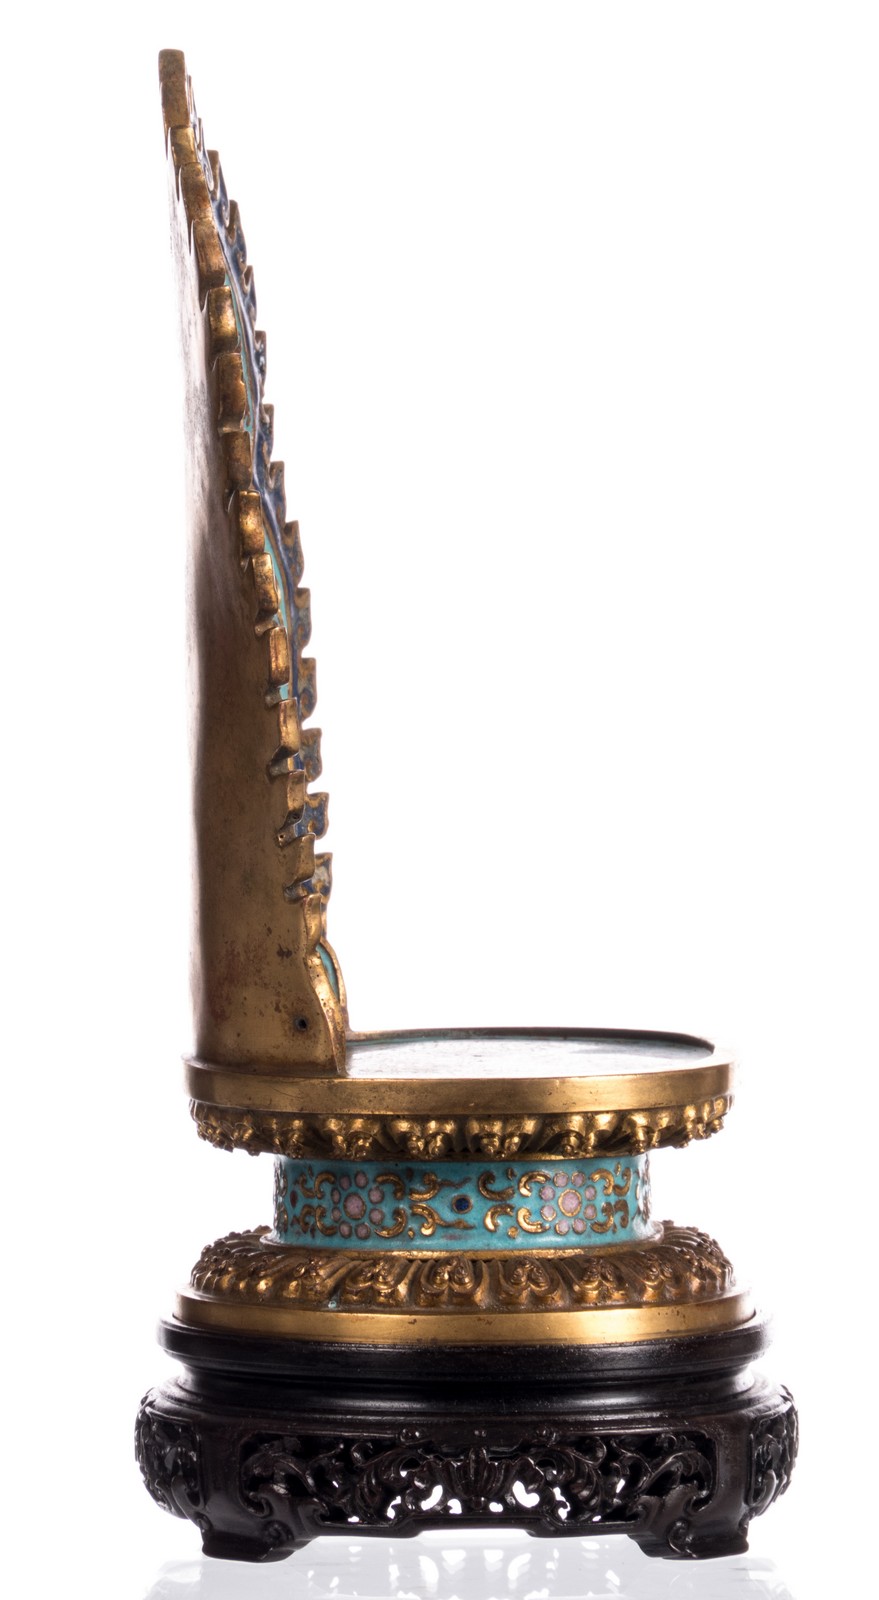 A Chinese gilt bronze cloisonné domestic altar with an aureole, floral and relief decorated, on a - Image 5 of 10